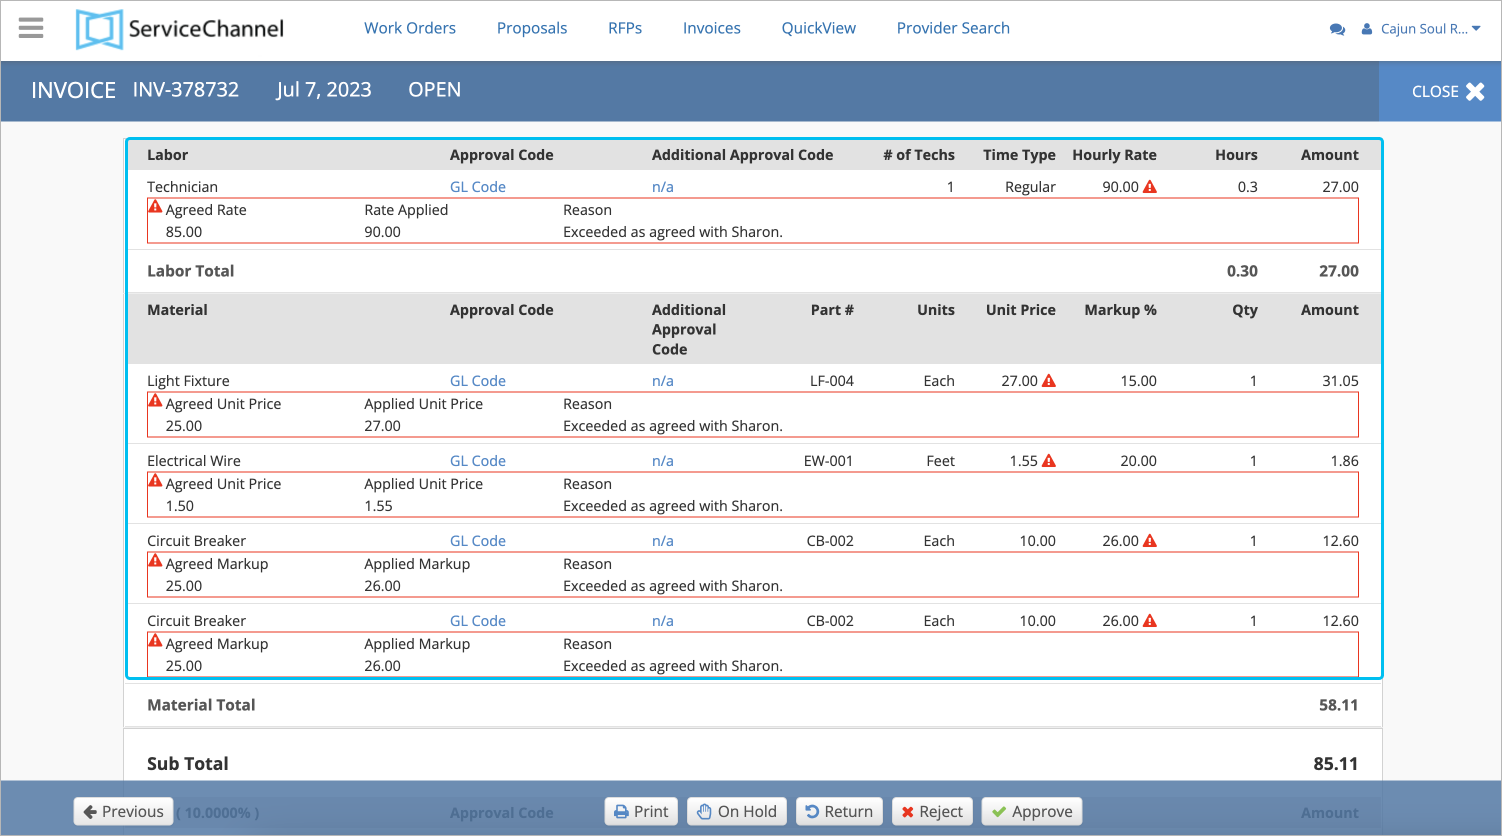 Screenshot showing invoice mismatches validated through price lists and rate card